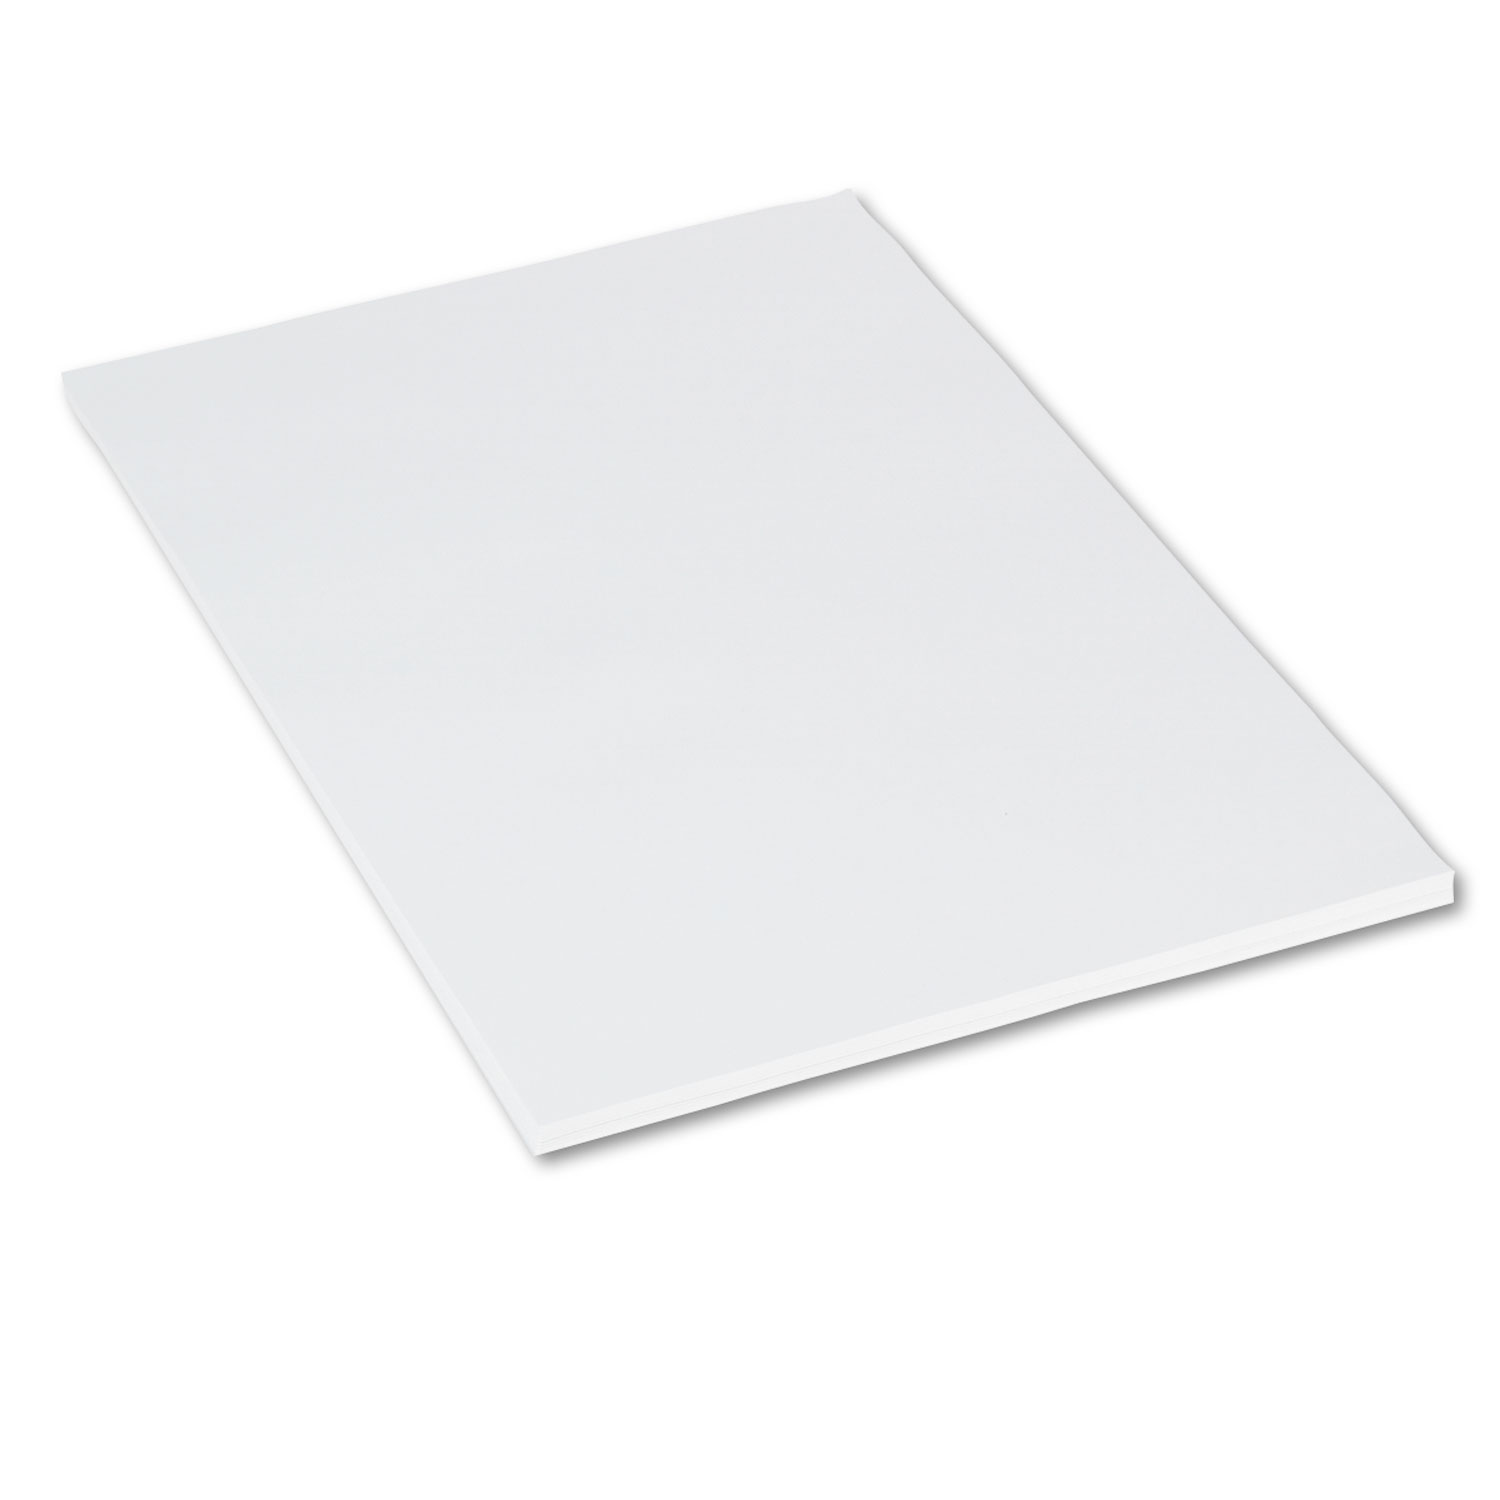 Medium Weight Tagboard, 36 x 24, White, 100/Pack